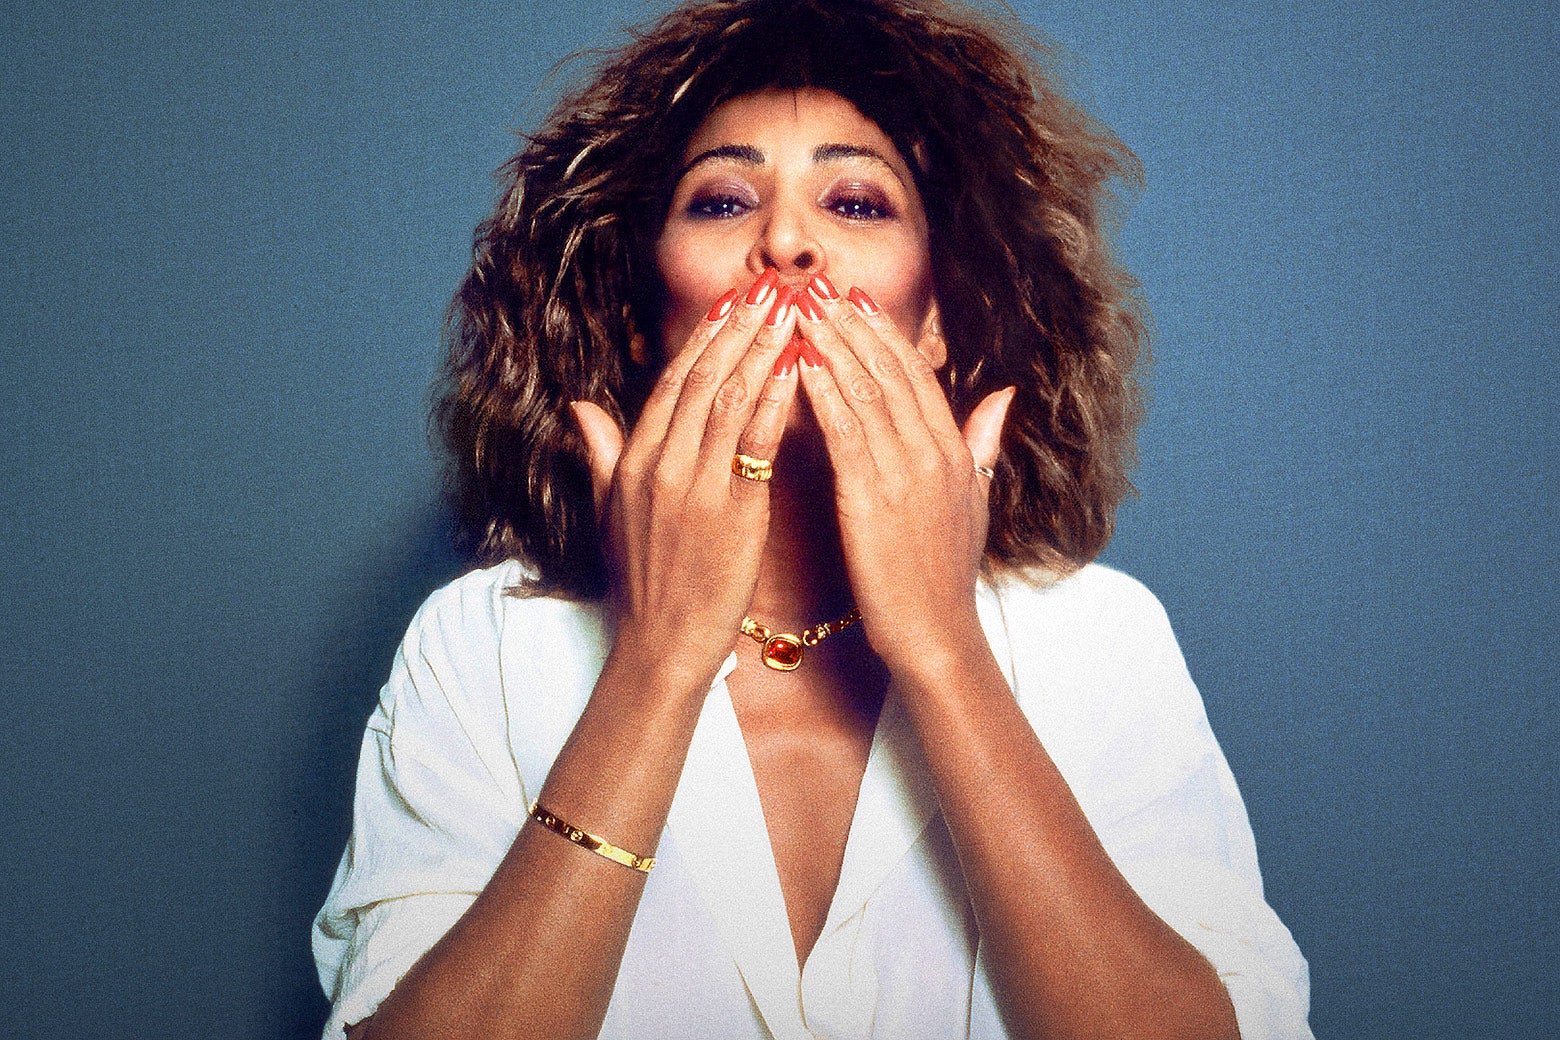 A photo of Tina Turner shows her looking at the camera, her hair all feathered out, both hands raised to her mouth, appearing to blow a kiss at the camera